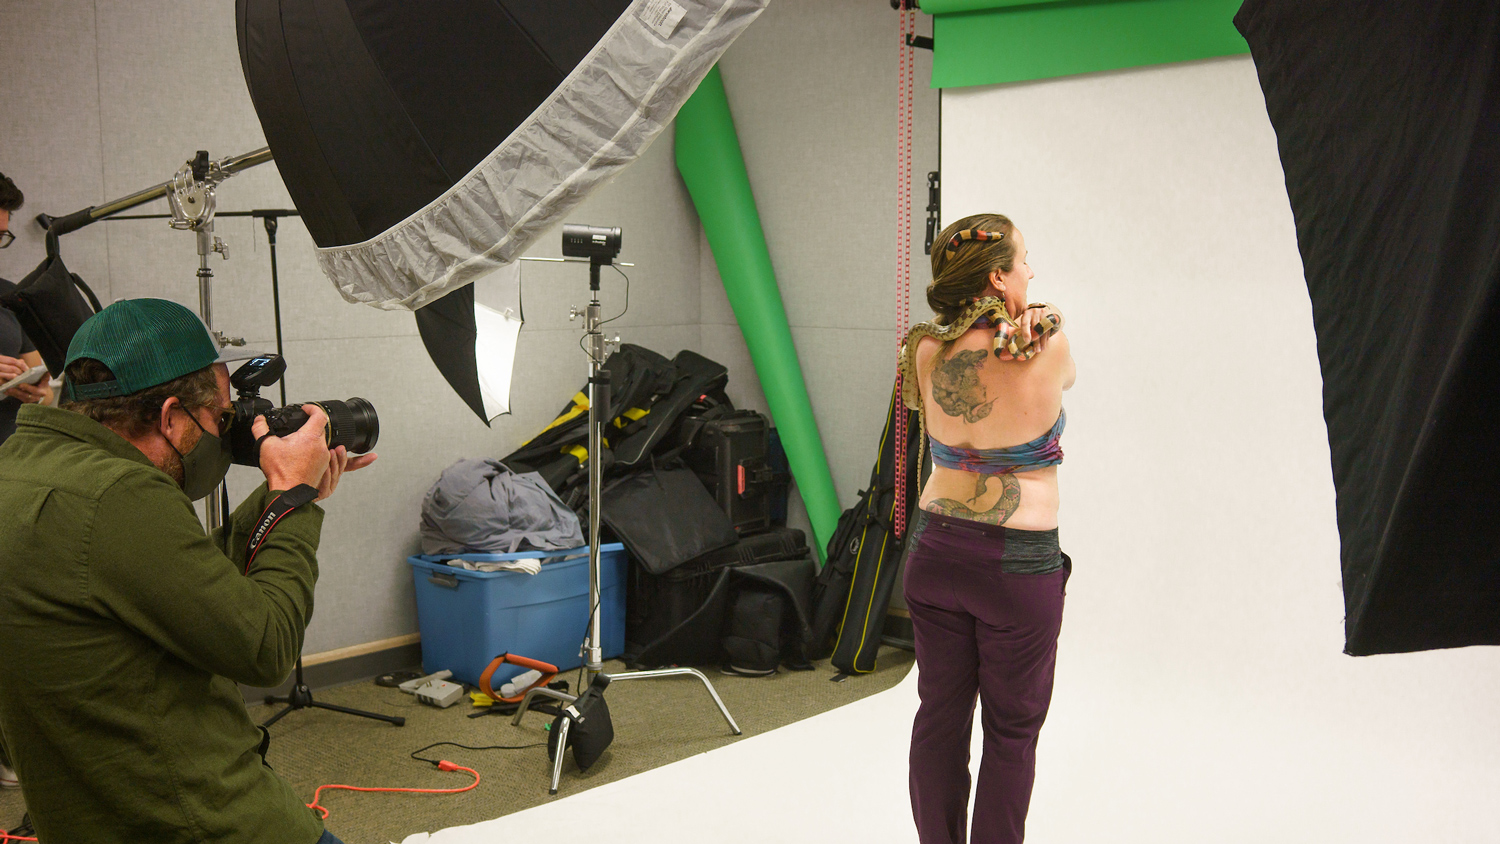 A photographer takes photos of a person holding snakes in a studio with lights and a white backdrop